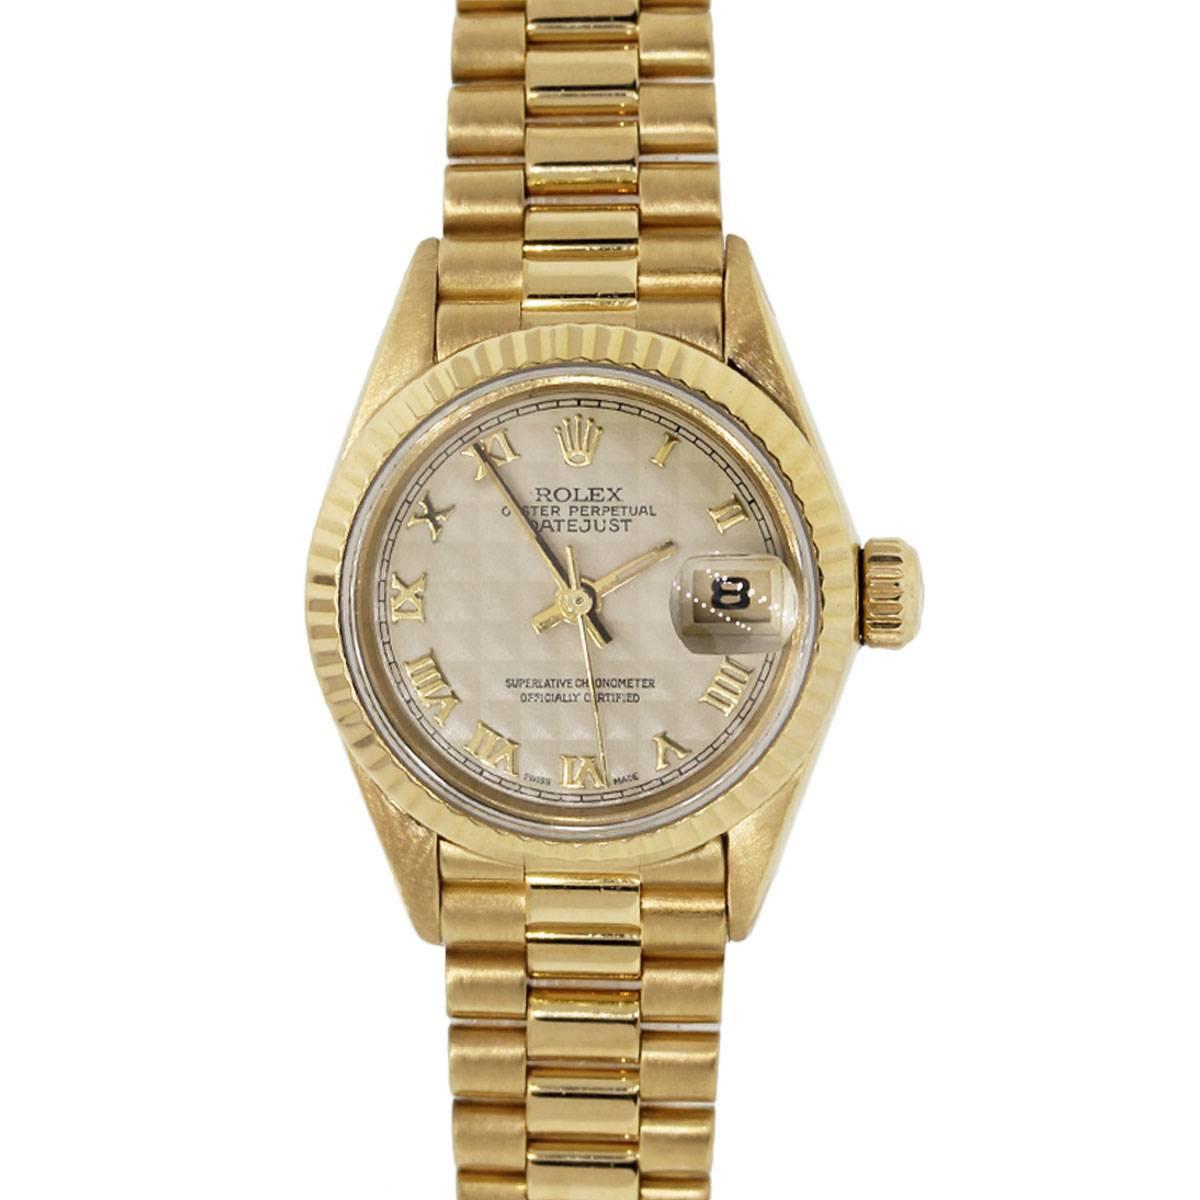 Rolex yellow gold Presidential Ivory Pyramid Dial Automatic Wristwatch